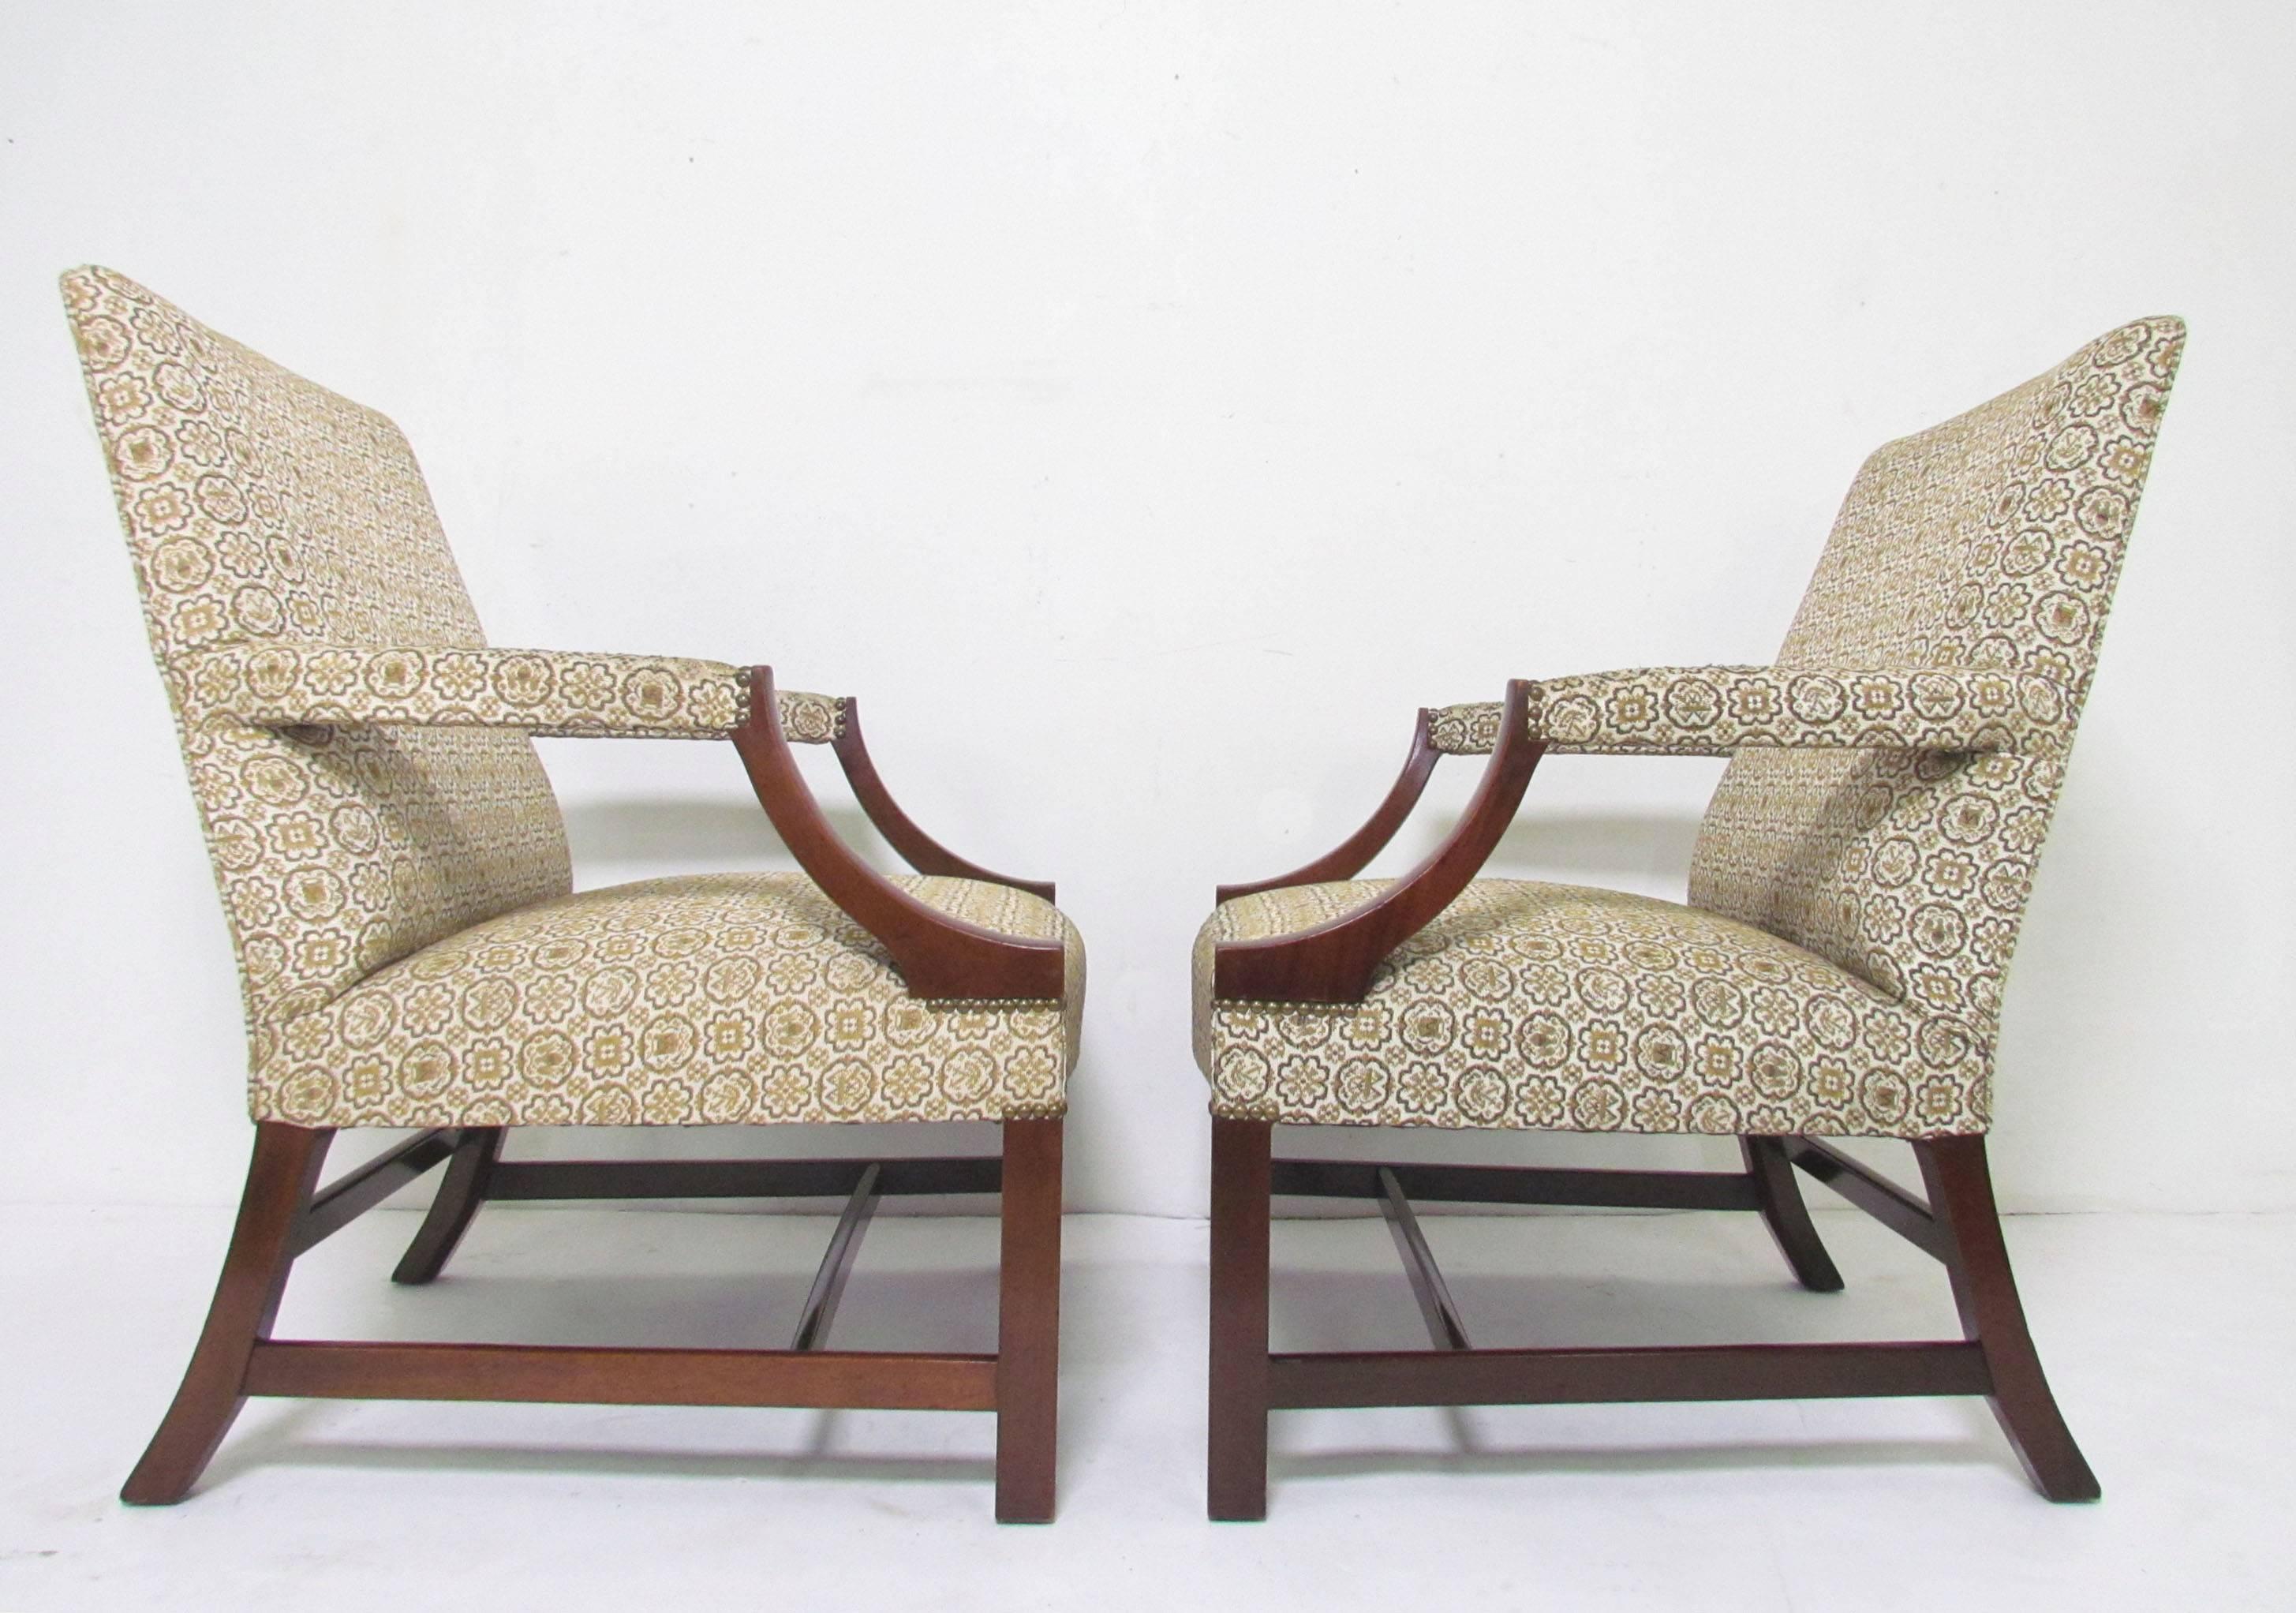 Pair of open-arm lounge chairs by Baker Furniture in the style of a George III Gainsborough chair (also known as a Martha Washington chair).